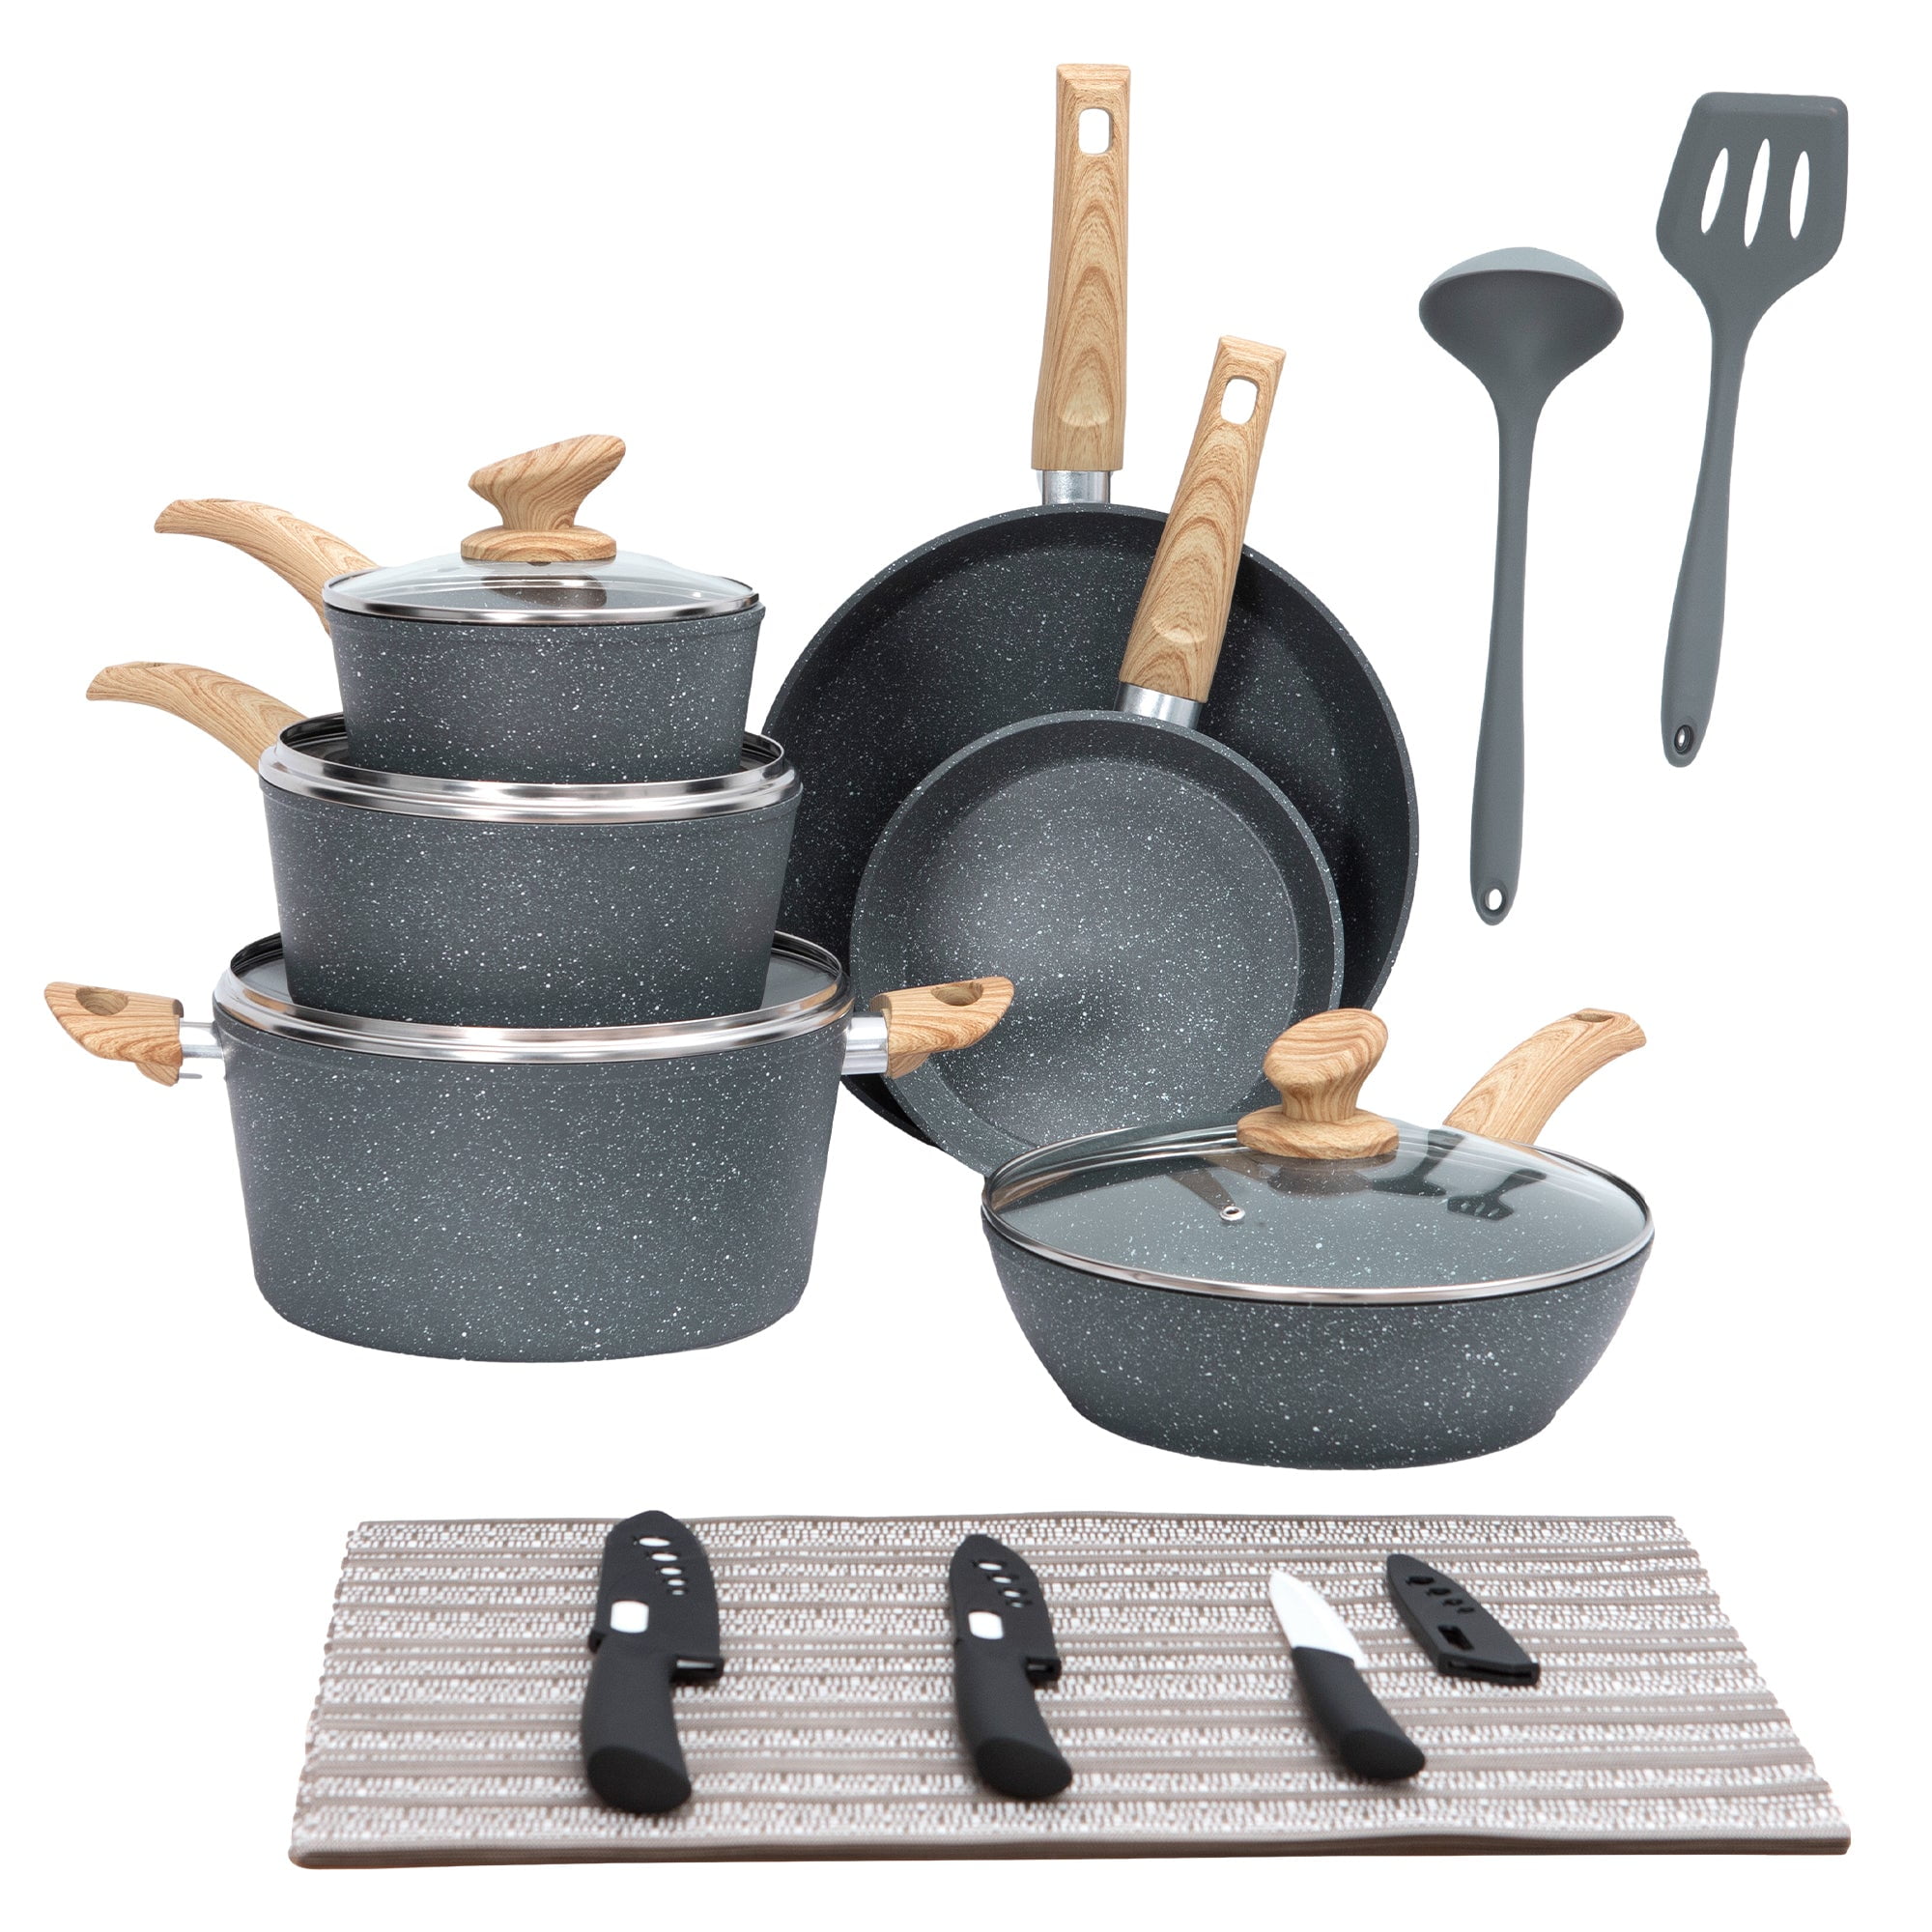 Thermo-Spot Non-Stick Aluminum Cookware Set (14 Piece) B039SE64, 1 -  Smith's Food and Drug